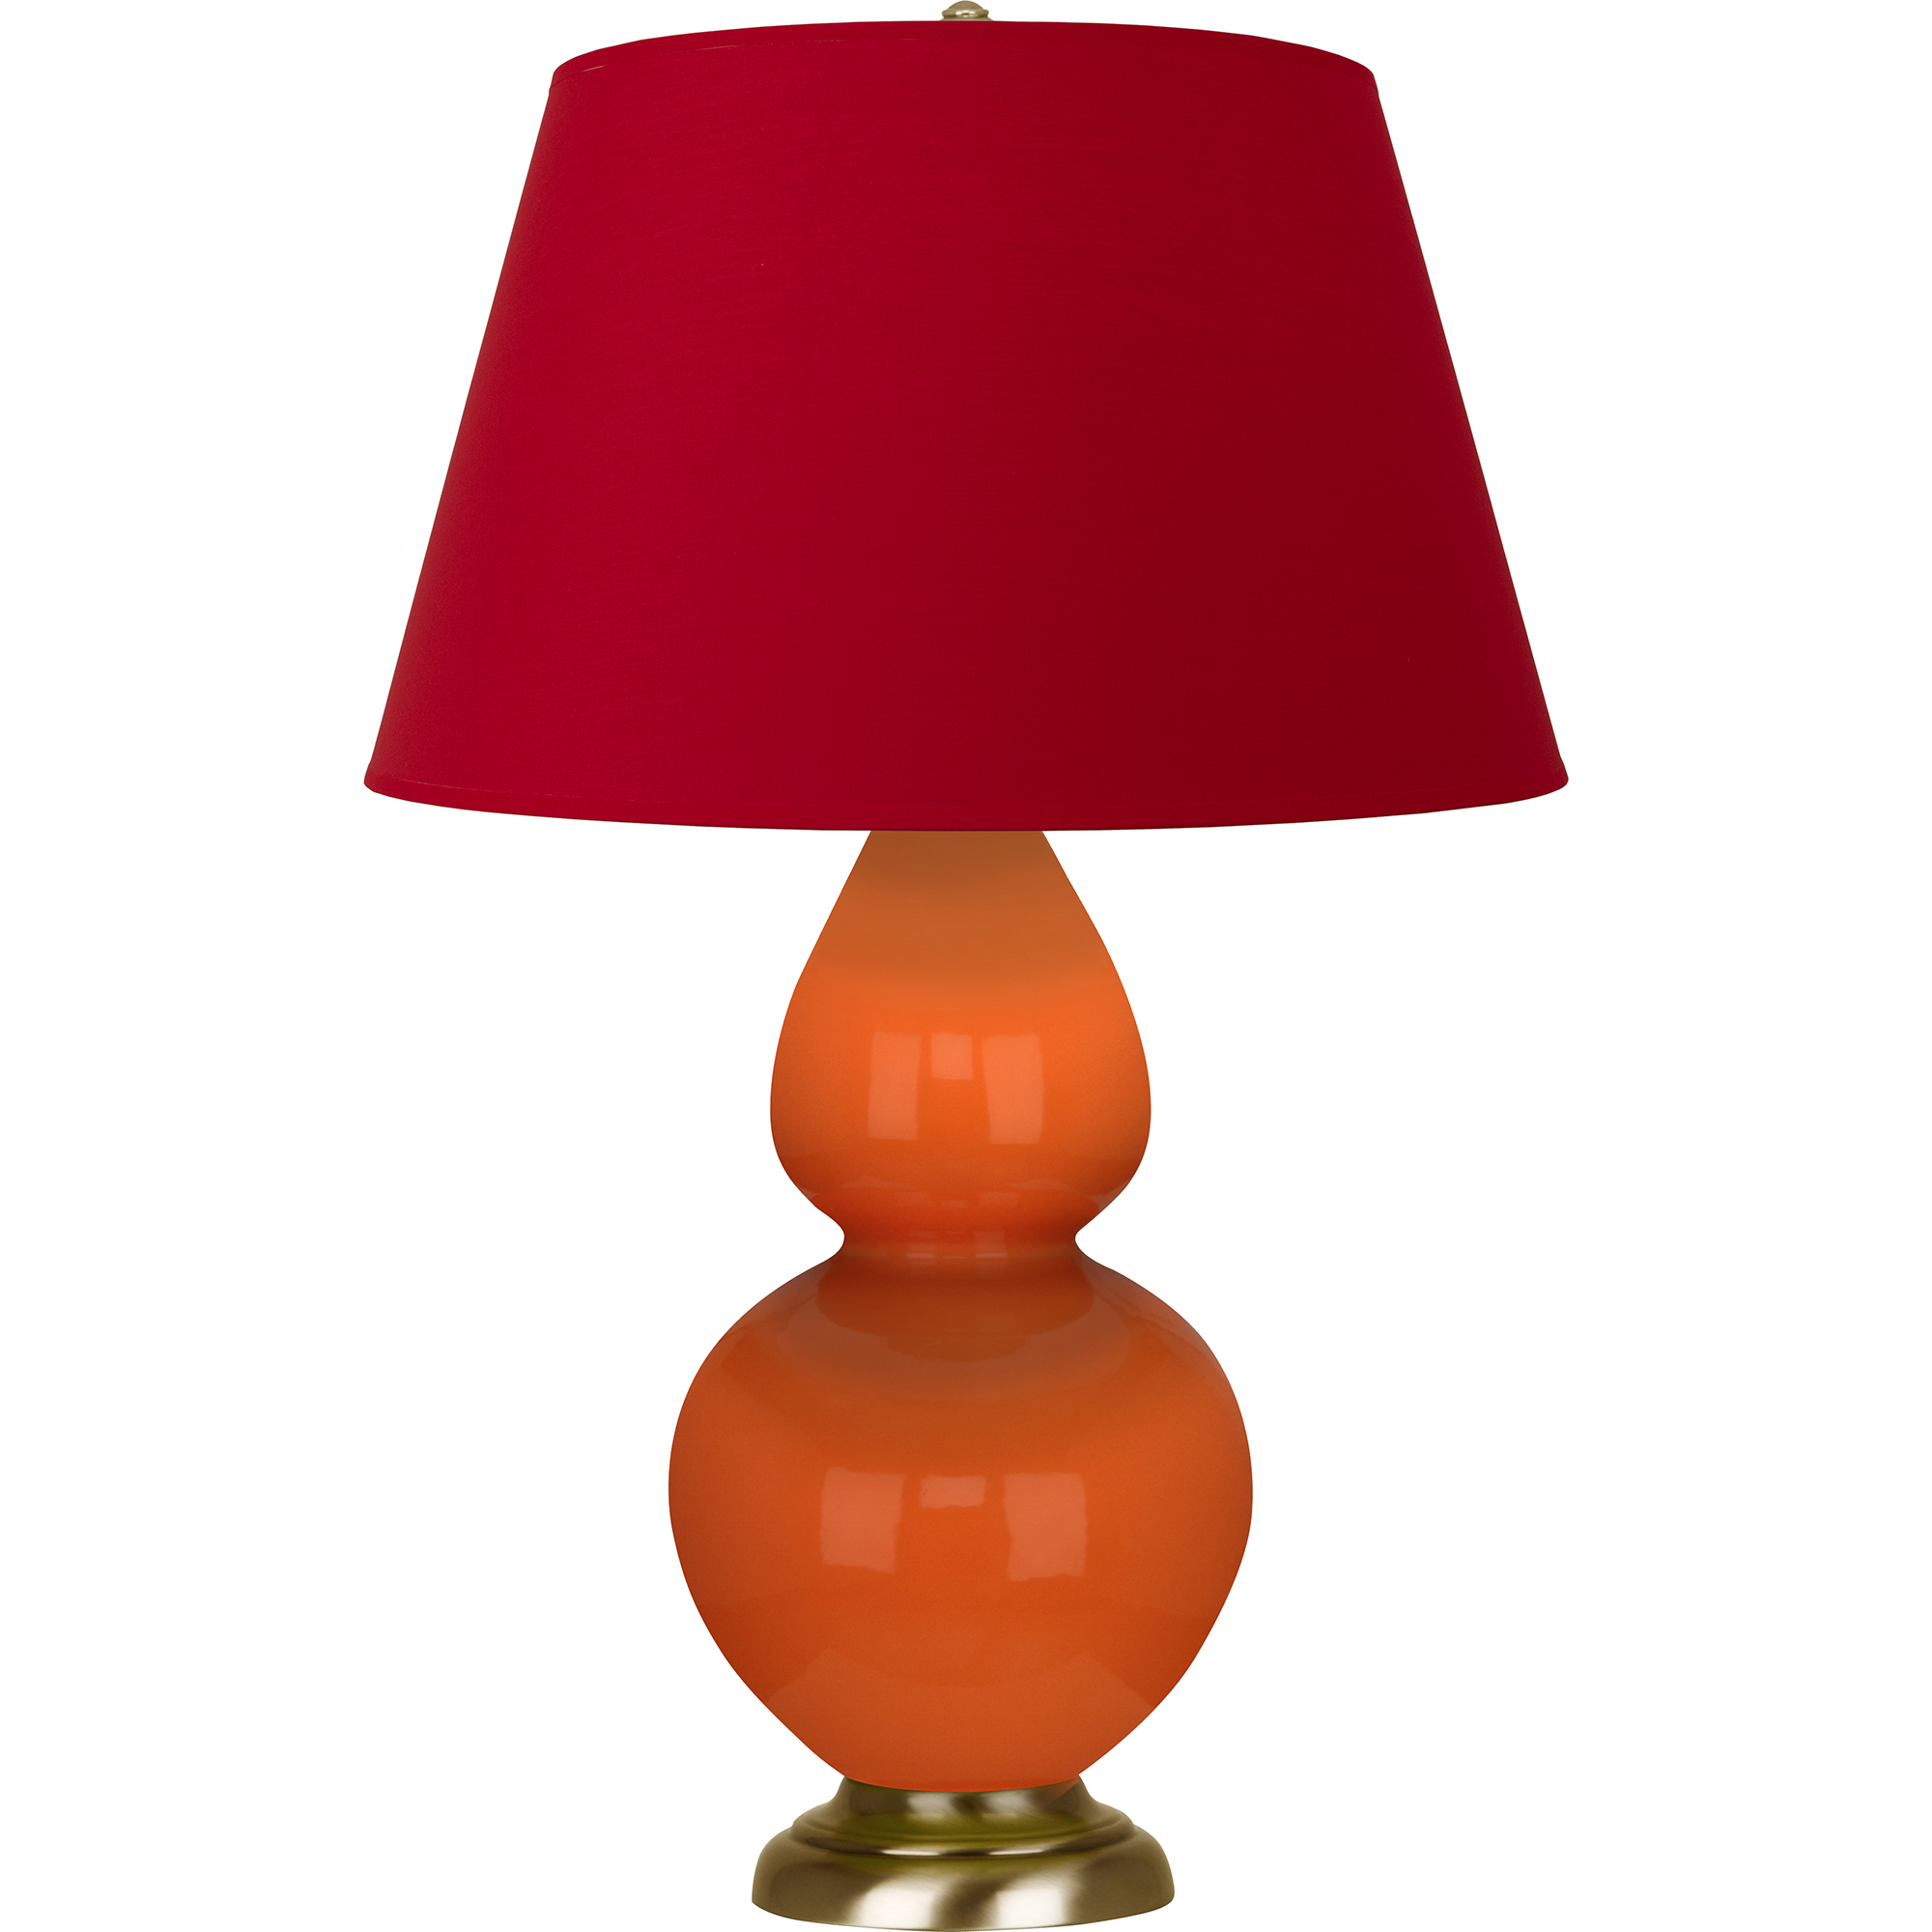 Double Gourd Table Lamp Style #1665R